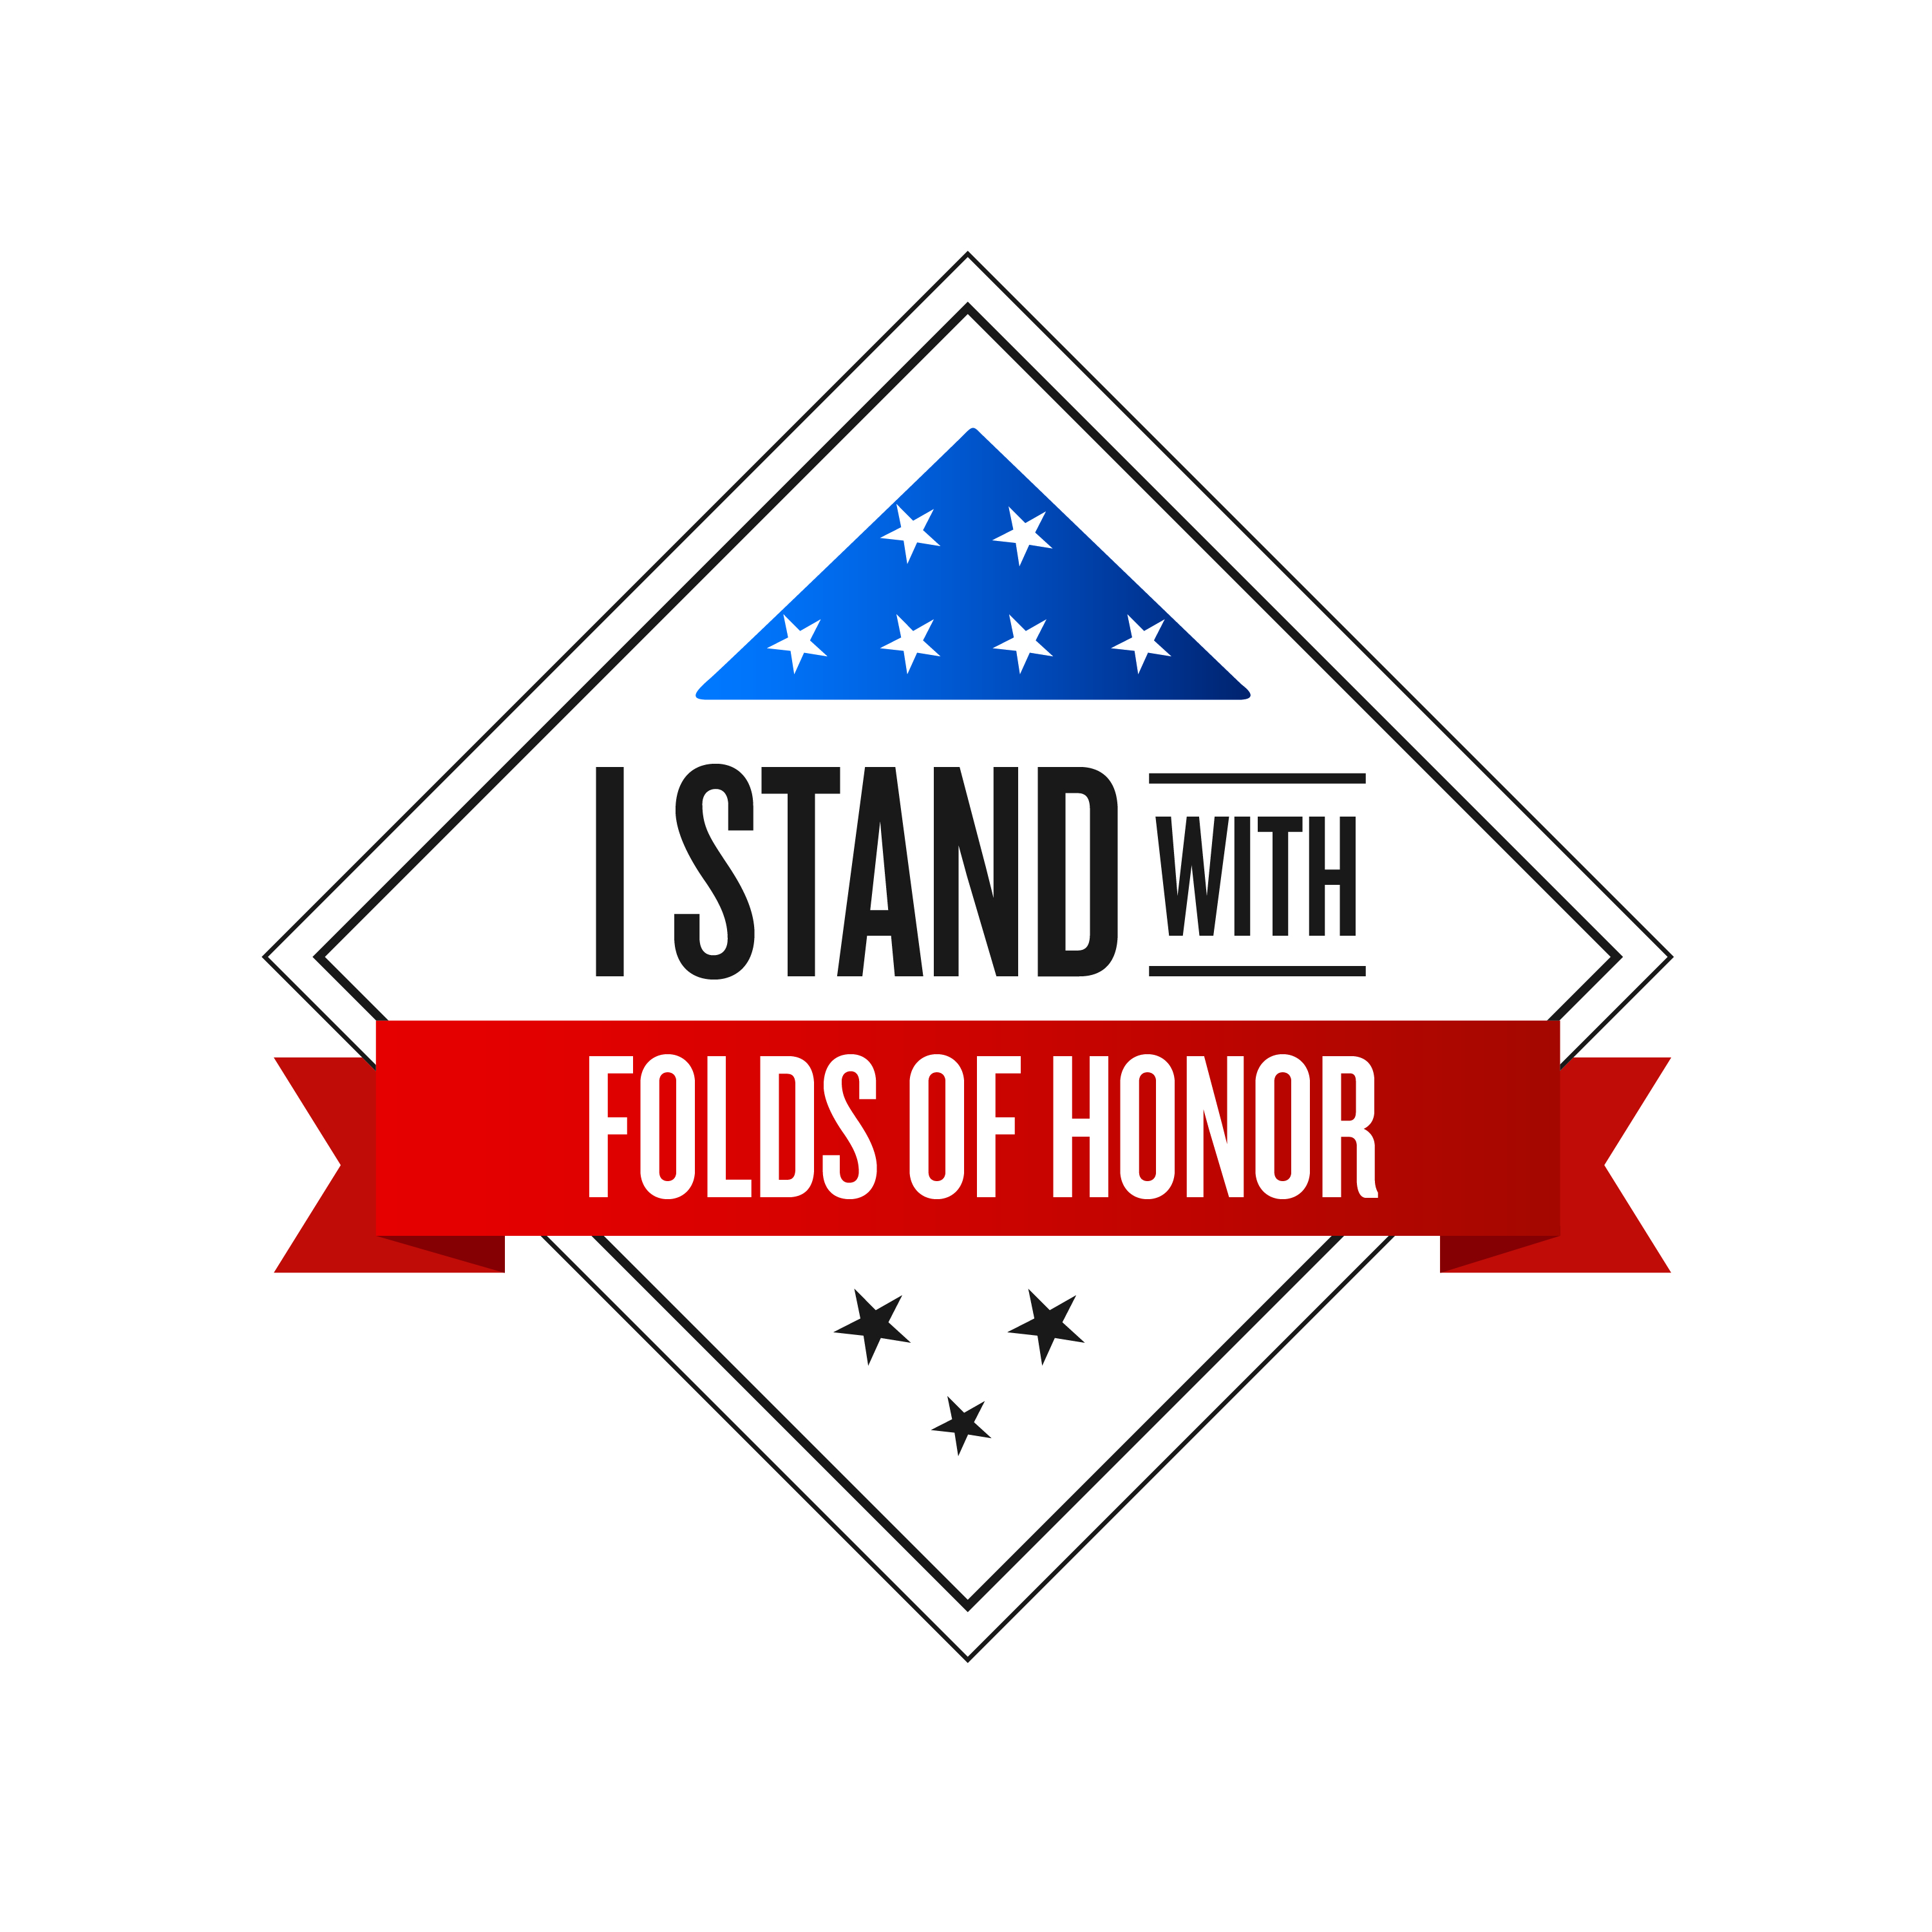 I STAND WITH FOLDS OF HONOR